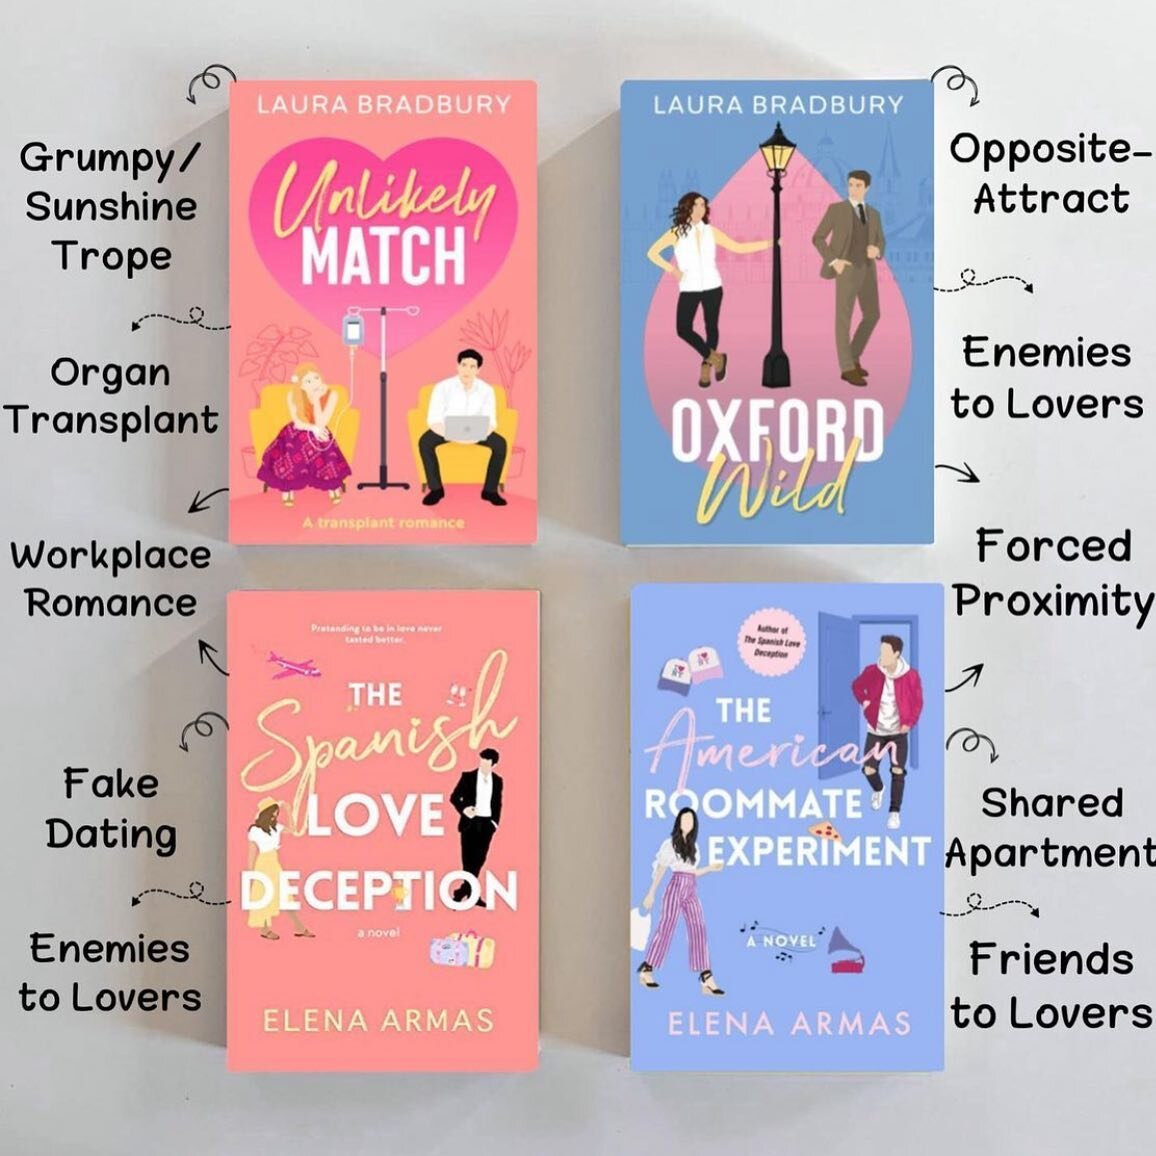 Cheers to @bookish_farrah for this gorgeous post with my books. To have them paired with @thebibliotheque &lsquo;s swoony stories is always an honour. Have I mentioned recently how much I adore bookstagram?
🍾
Working hard on my next Oxford book, Oxf